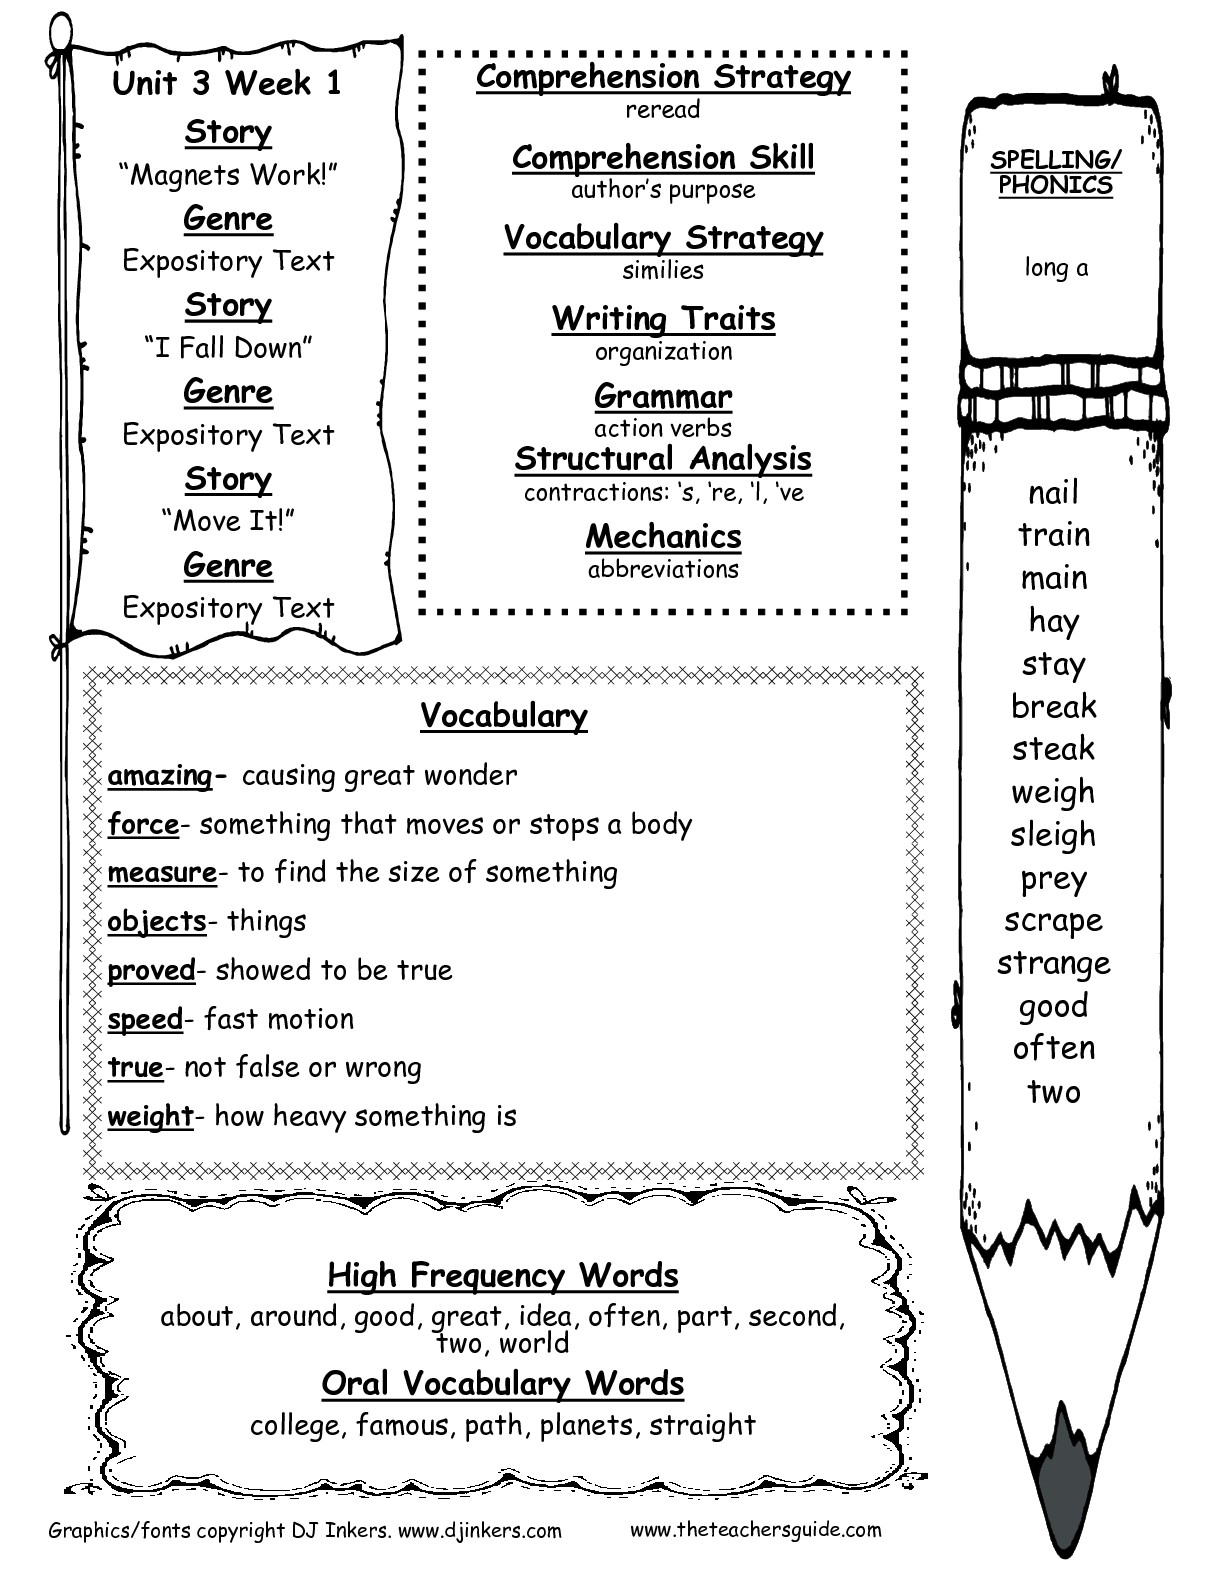 20-best-images-of-simile-worksheets-for-5th-grade-simile-worksheets-2nd-grade-metaphors-and